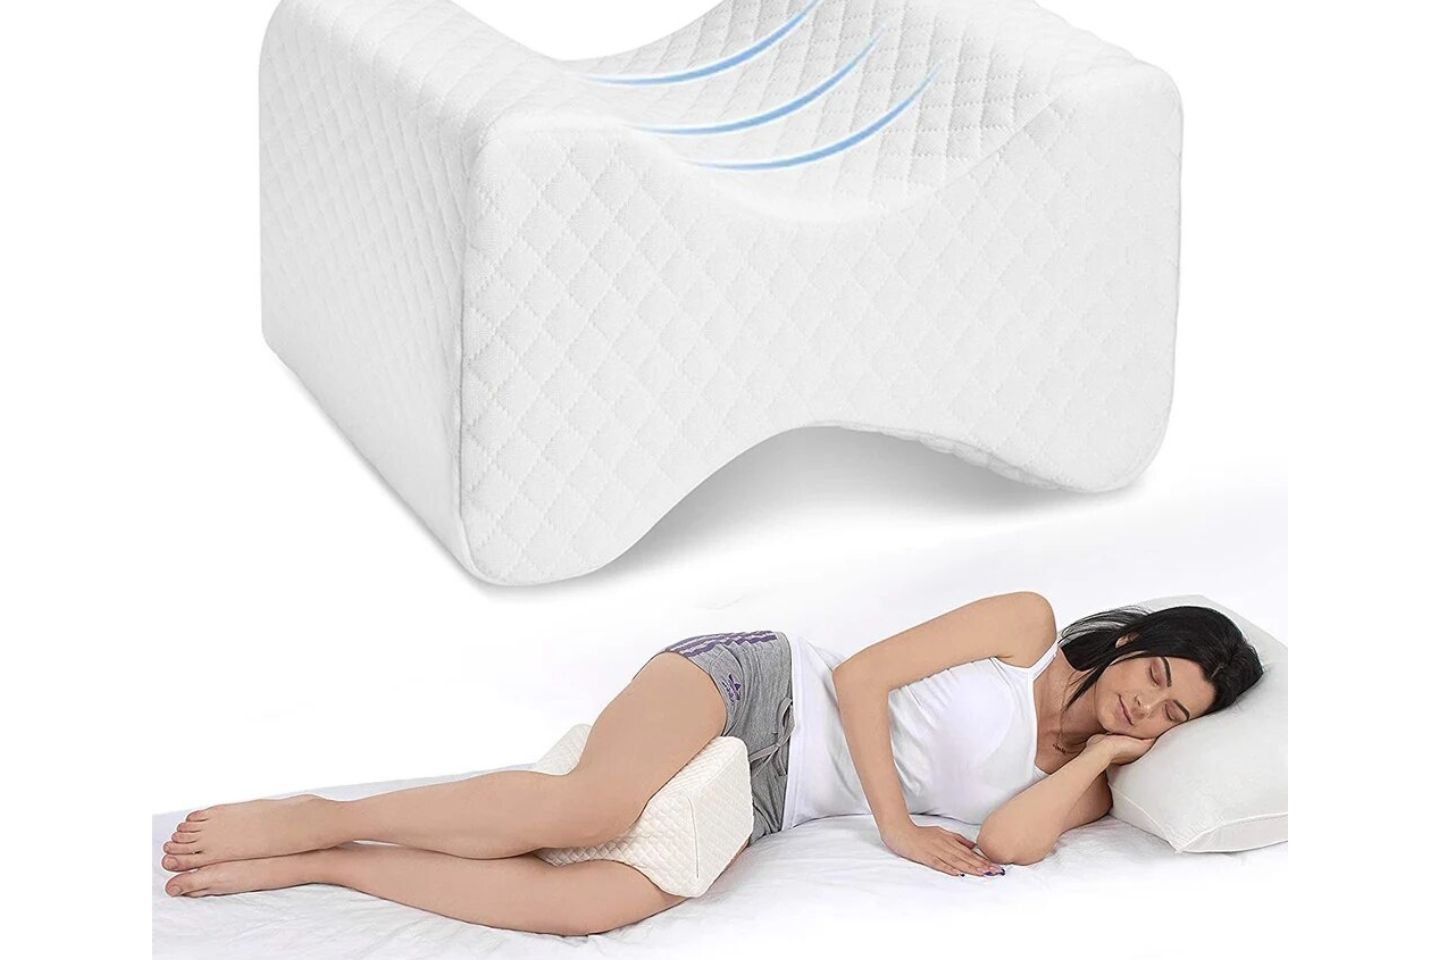 Using a Pillow for Lower Back Pain While Sitting